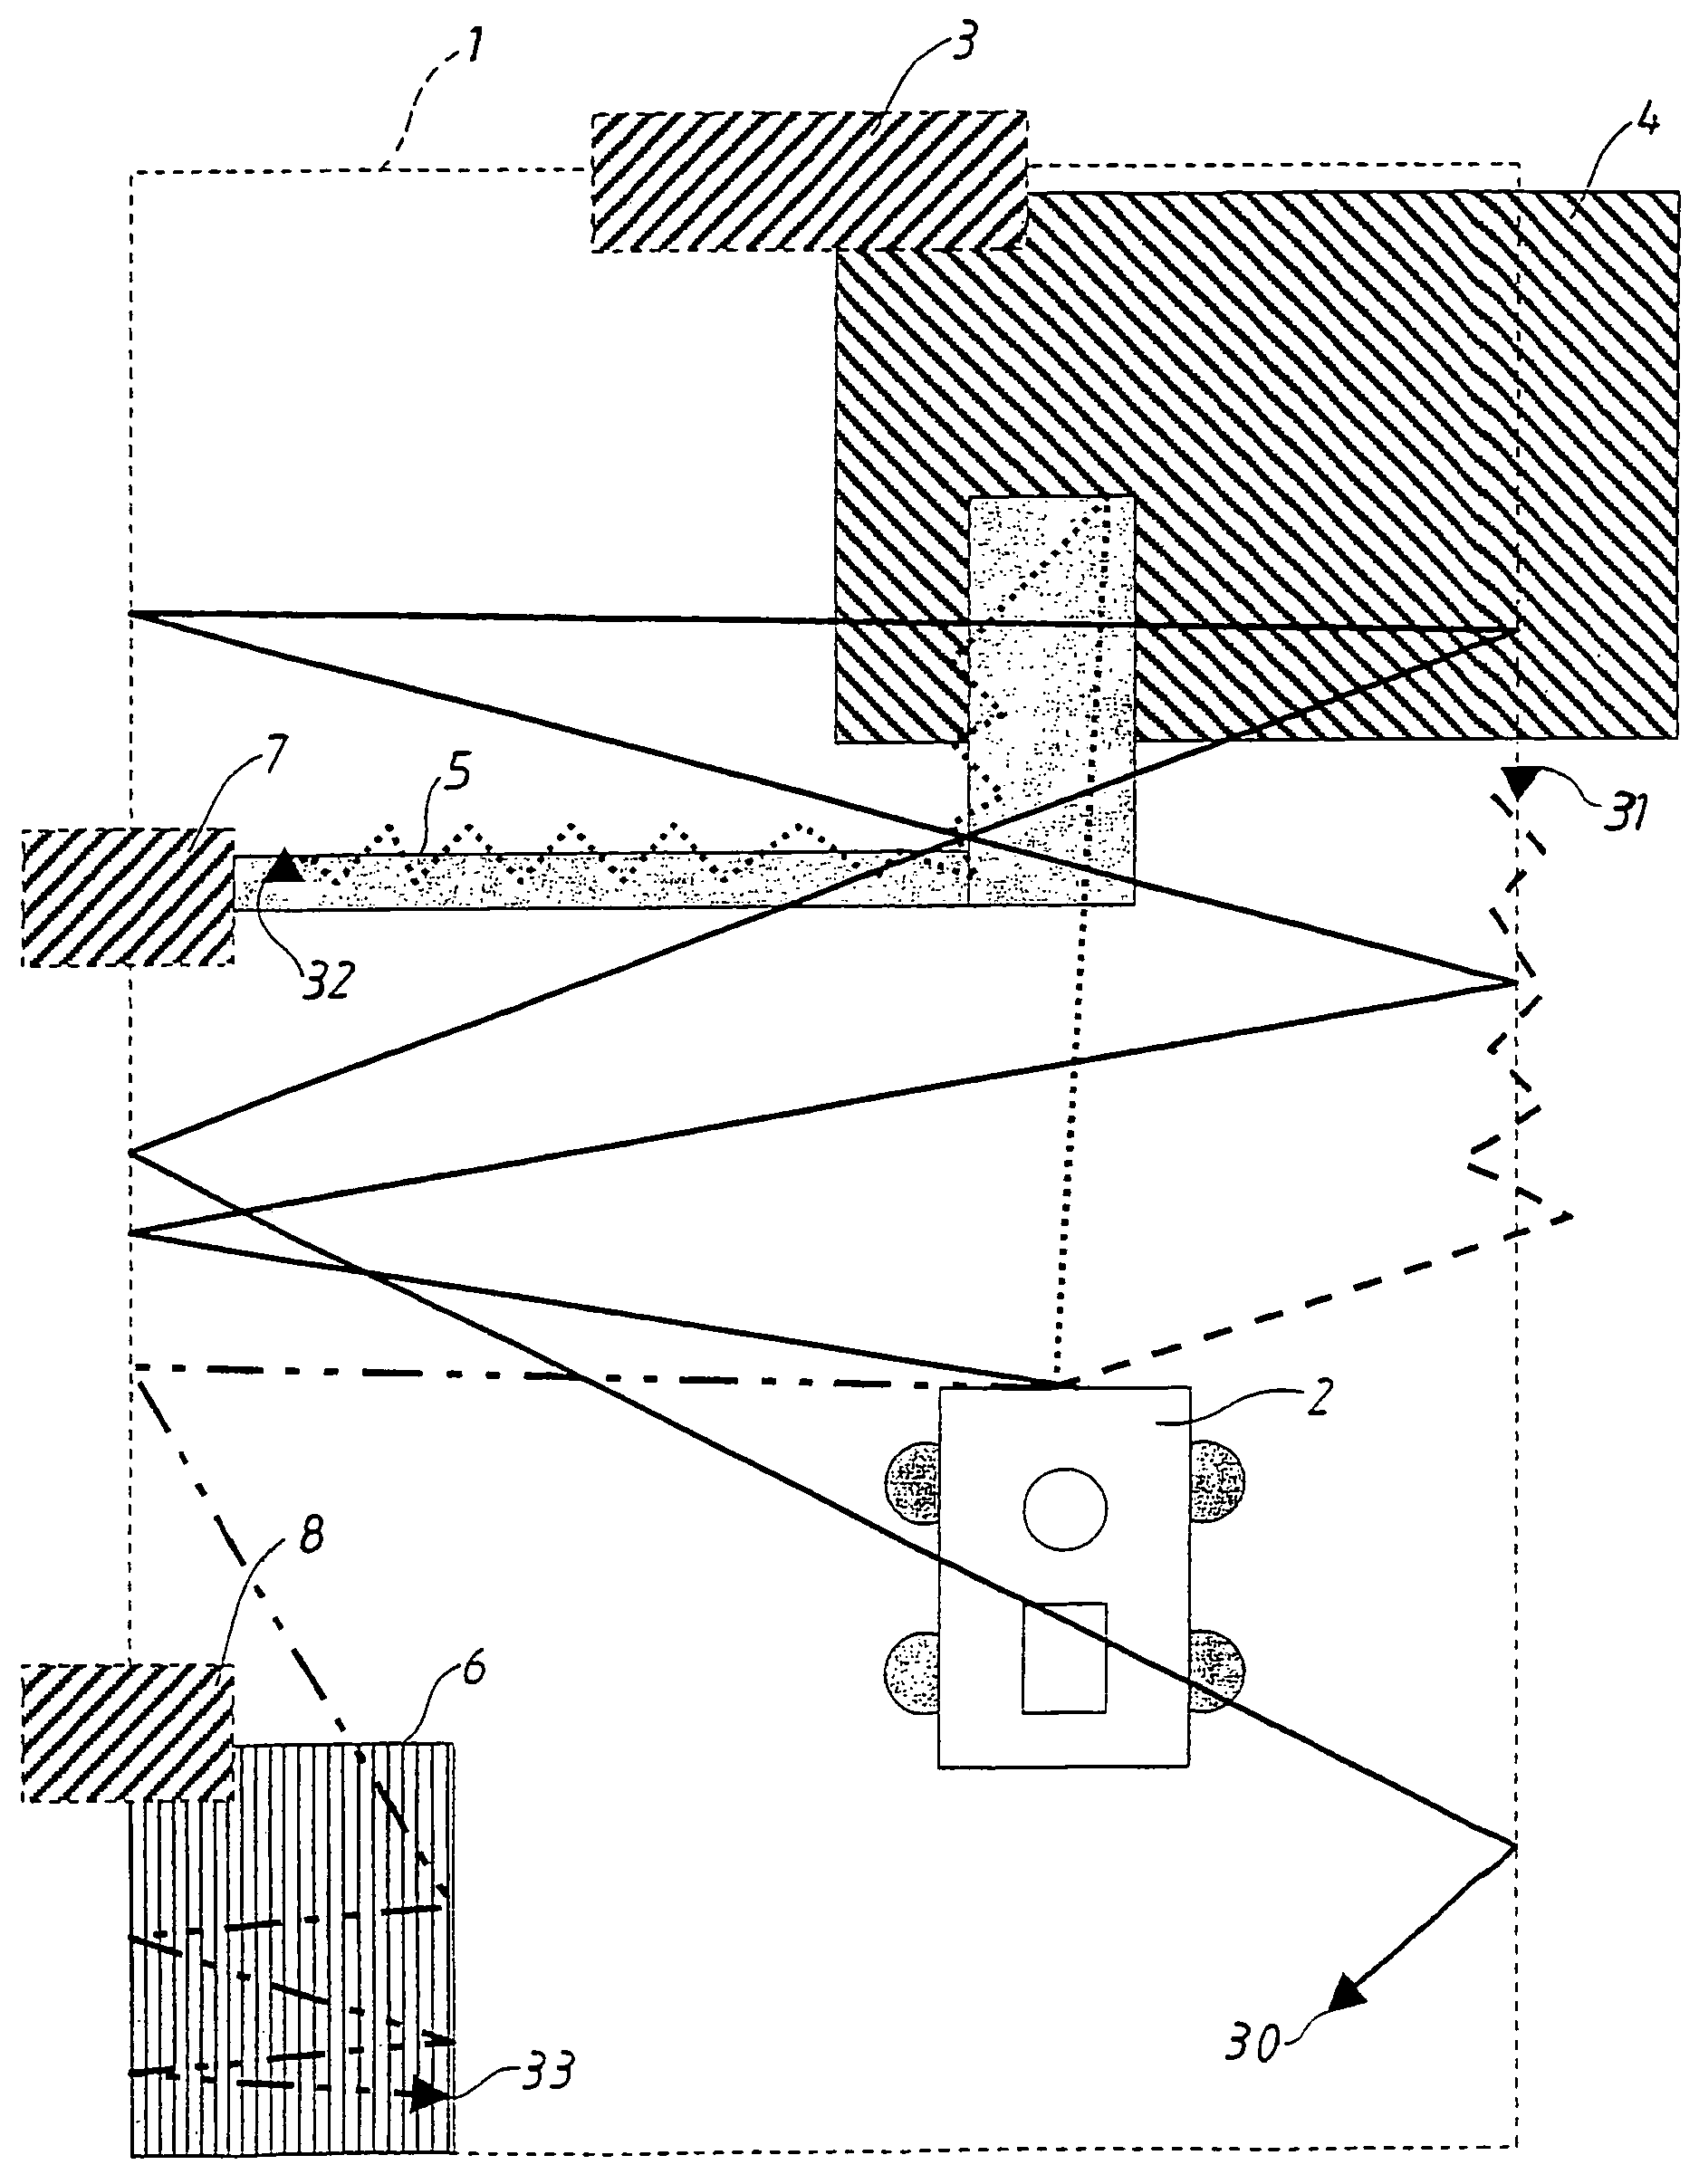 Electronic demarcating system